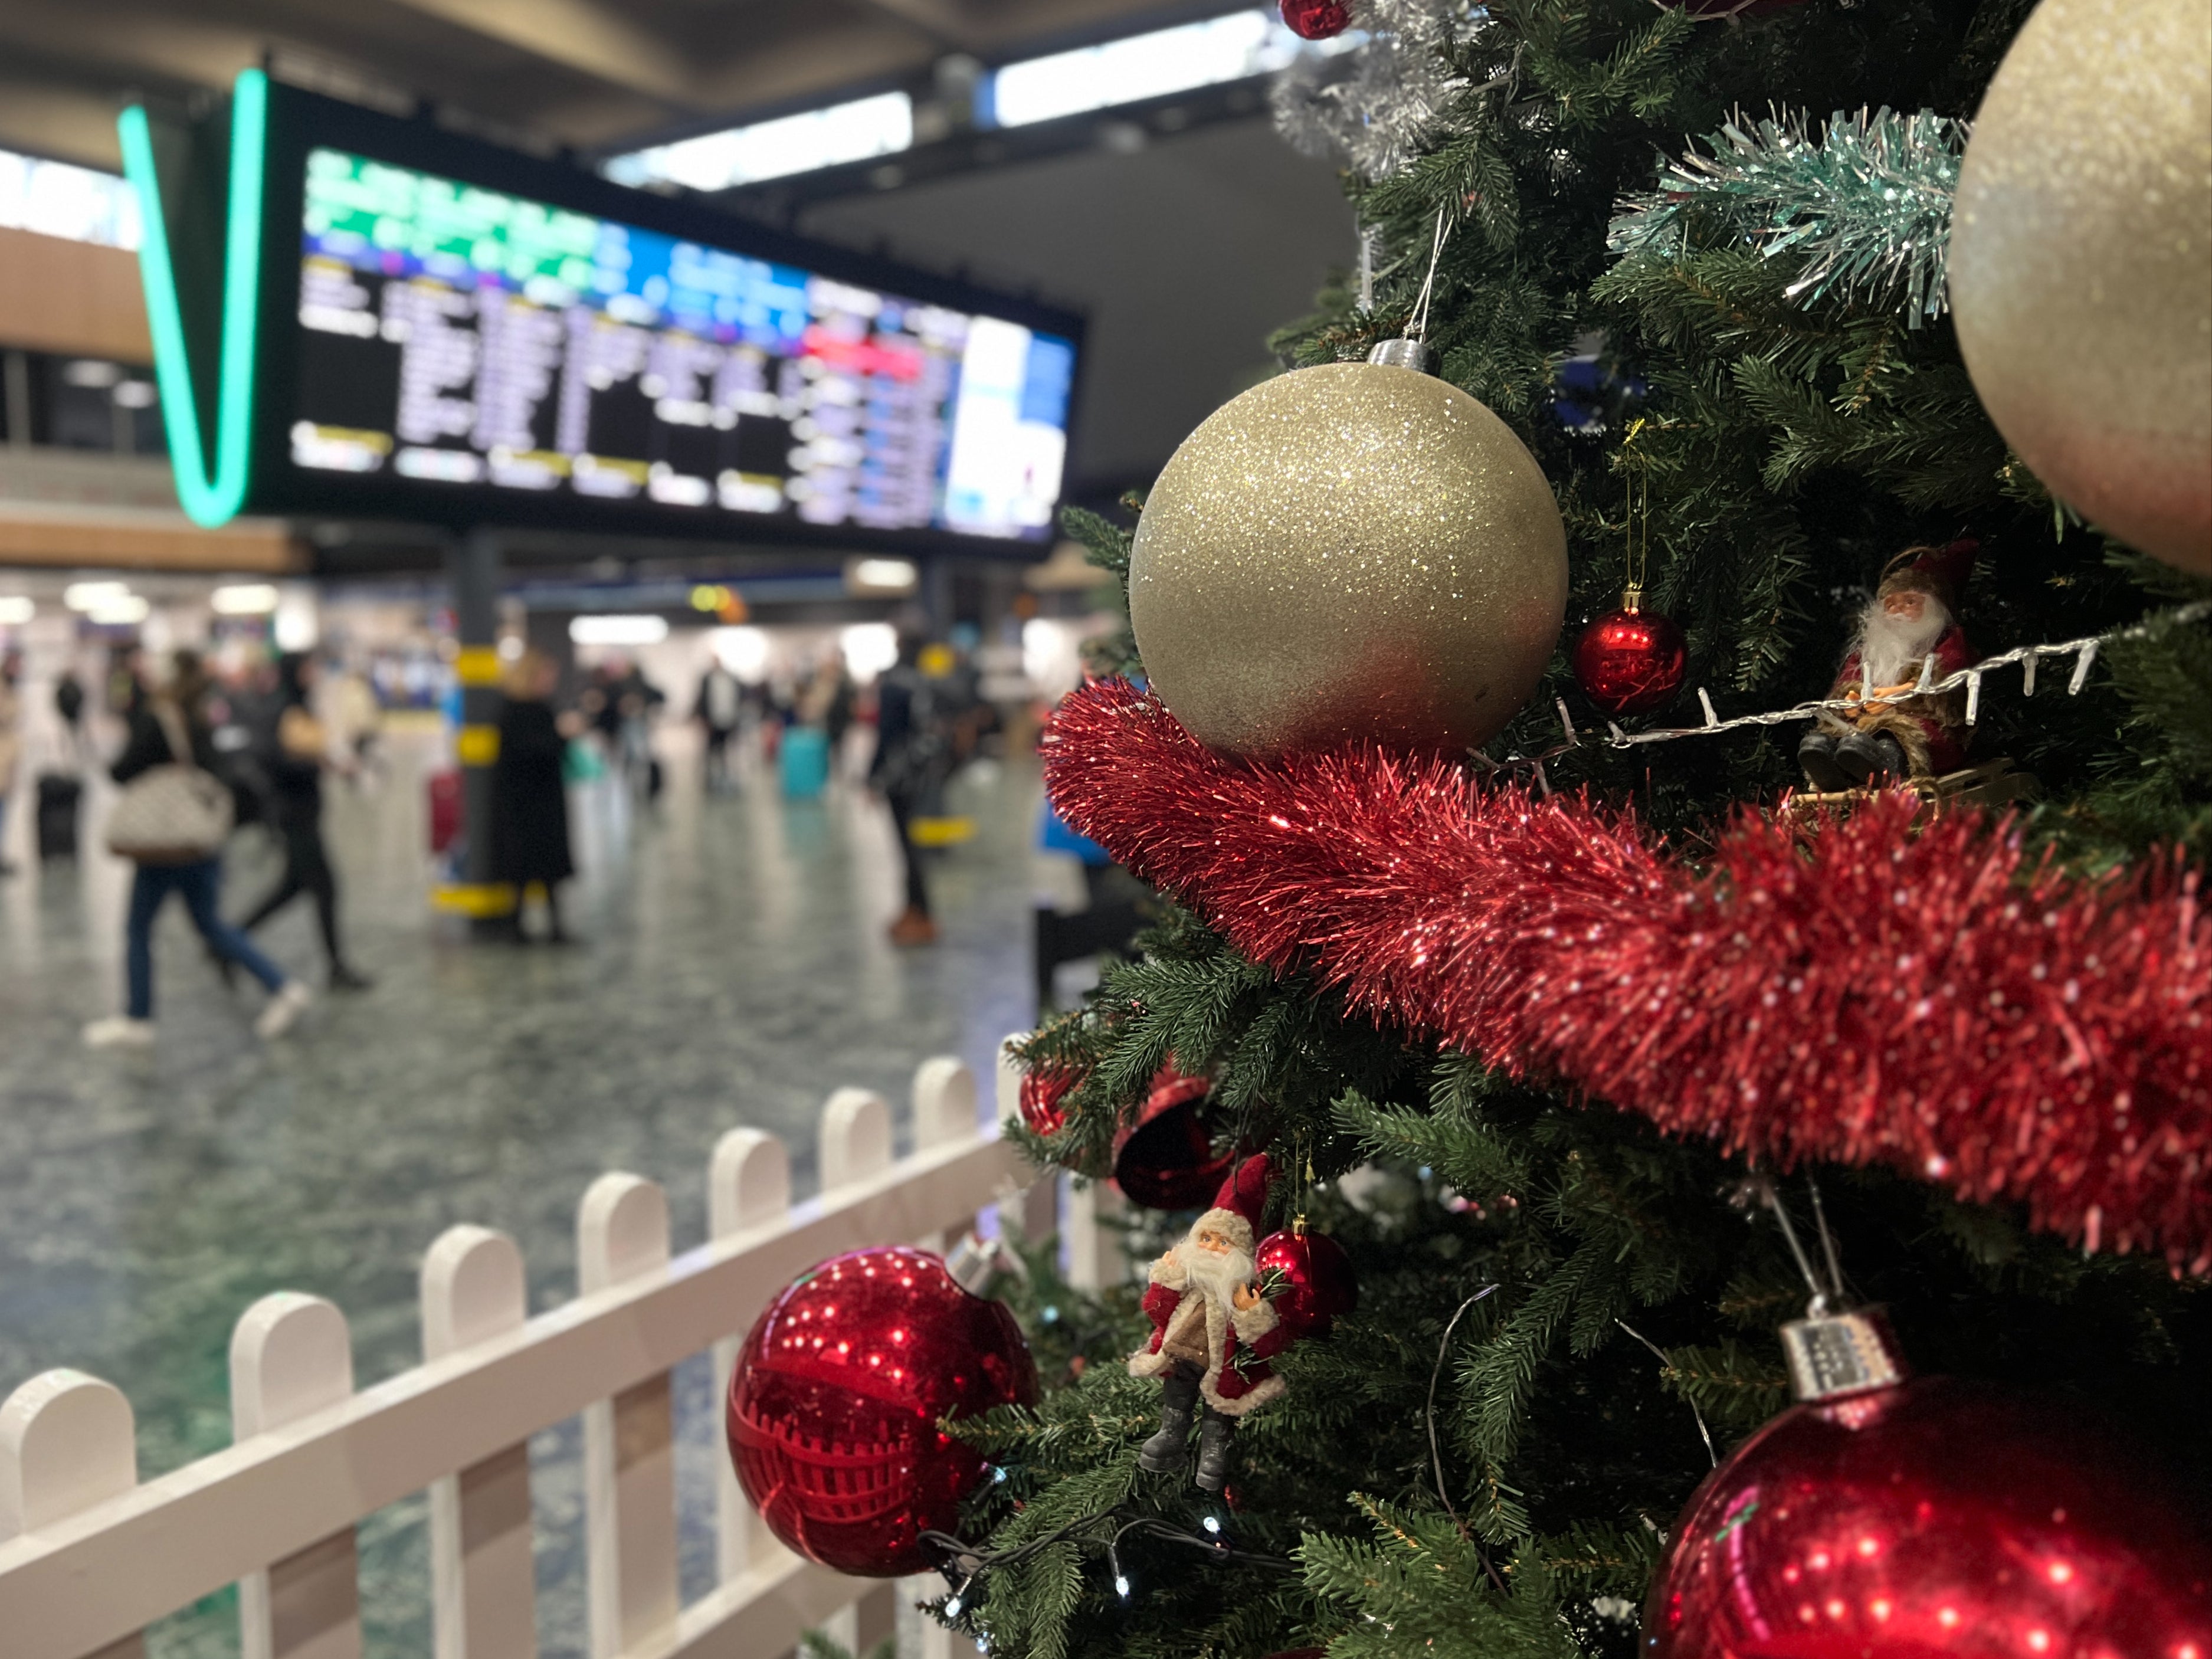 Christmas every day? Festive decorations at London Euston, where no long-distance trains will run on 3 December